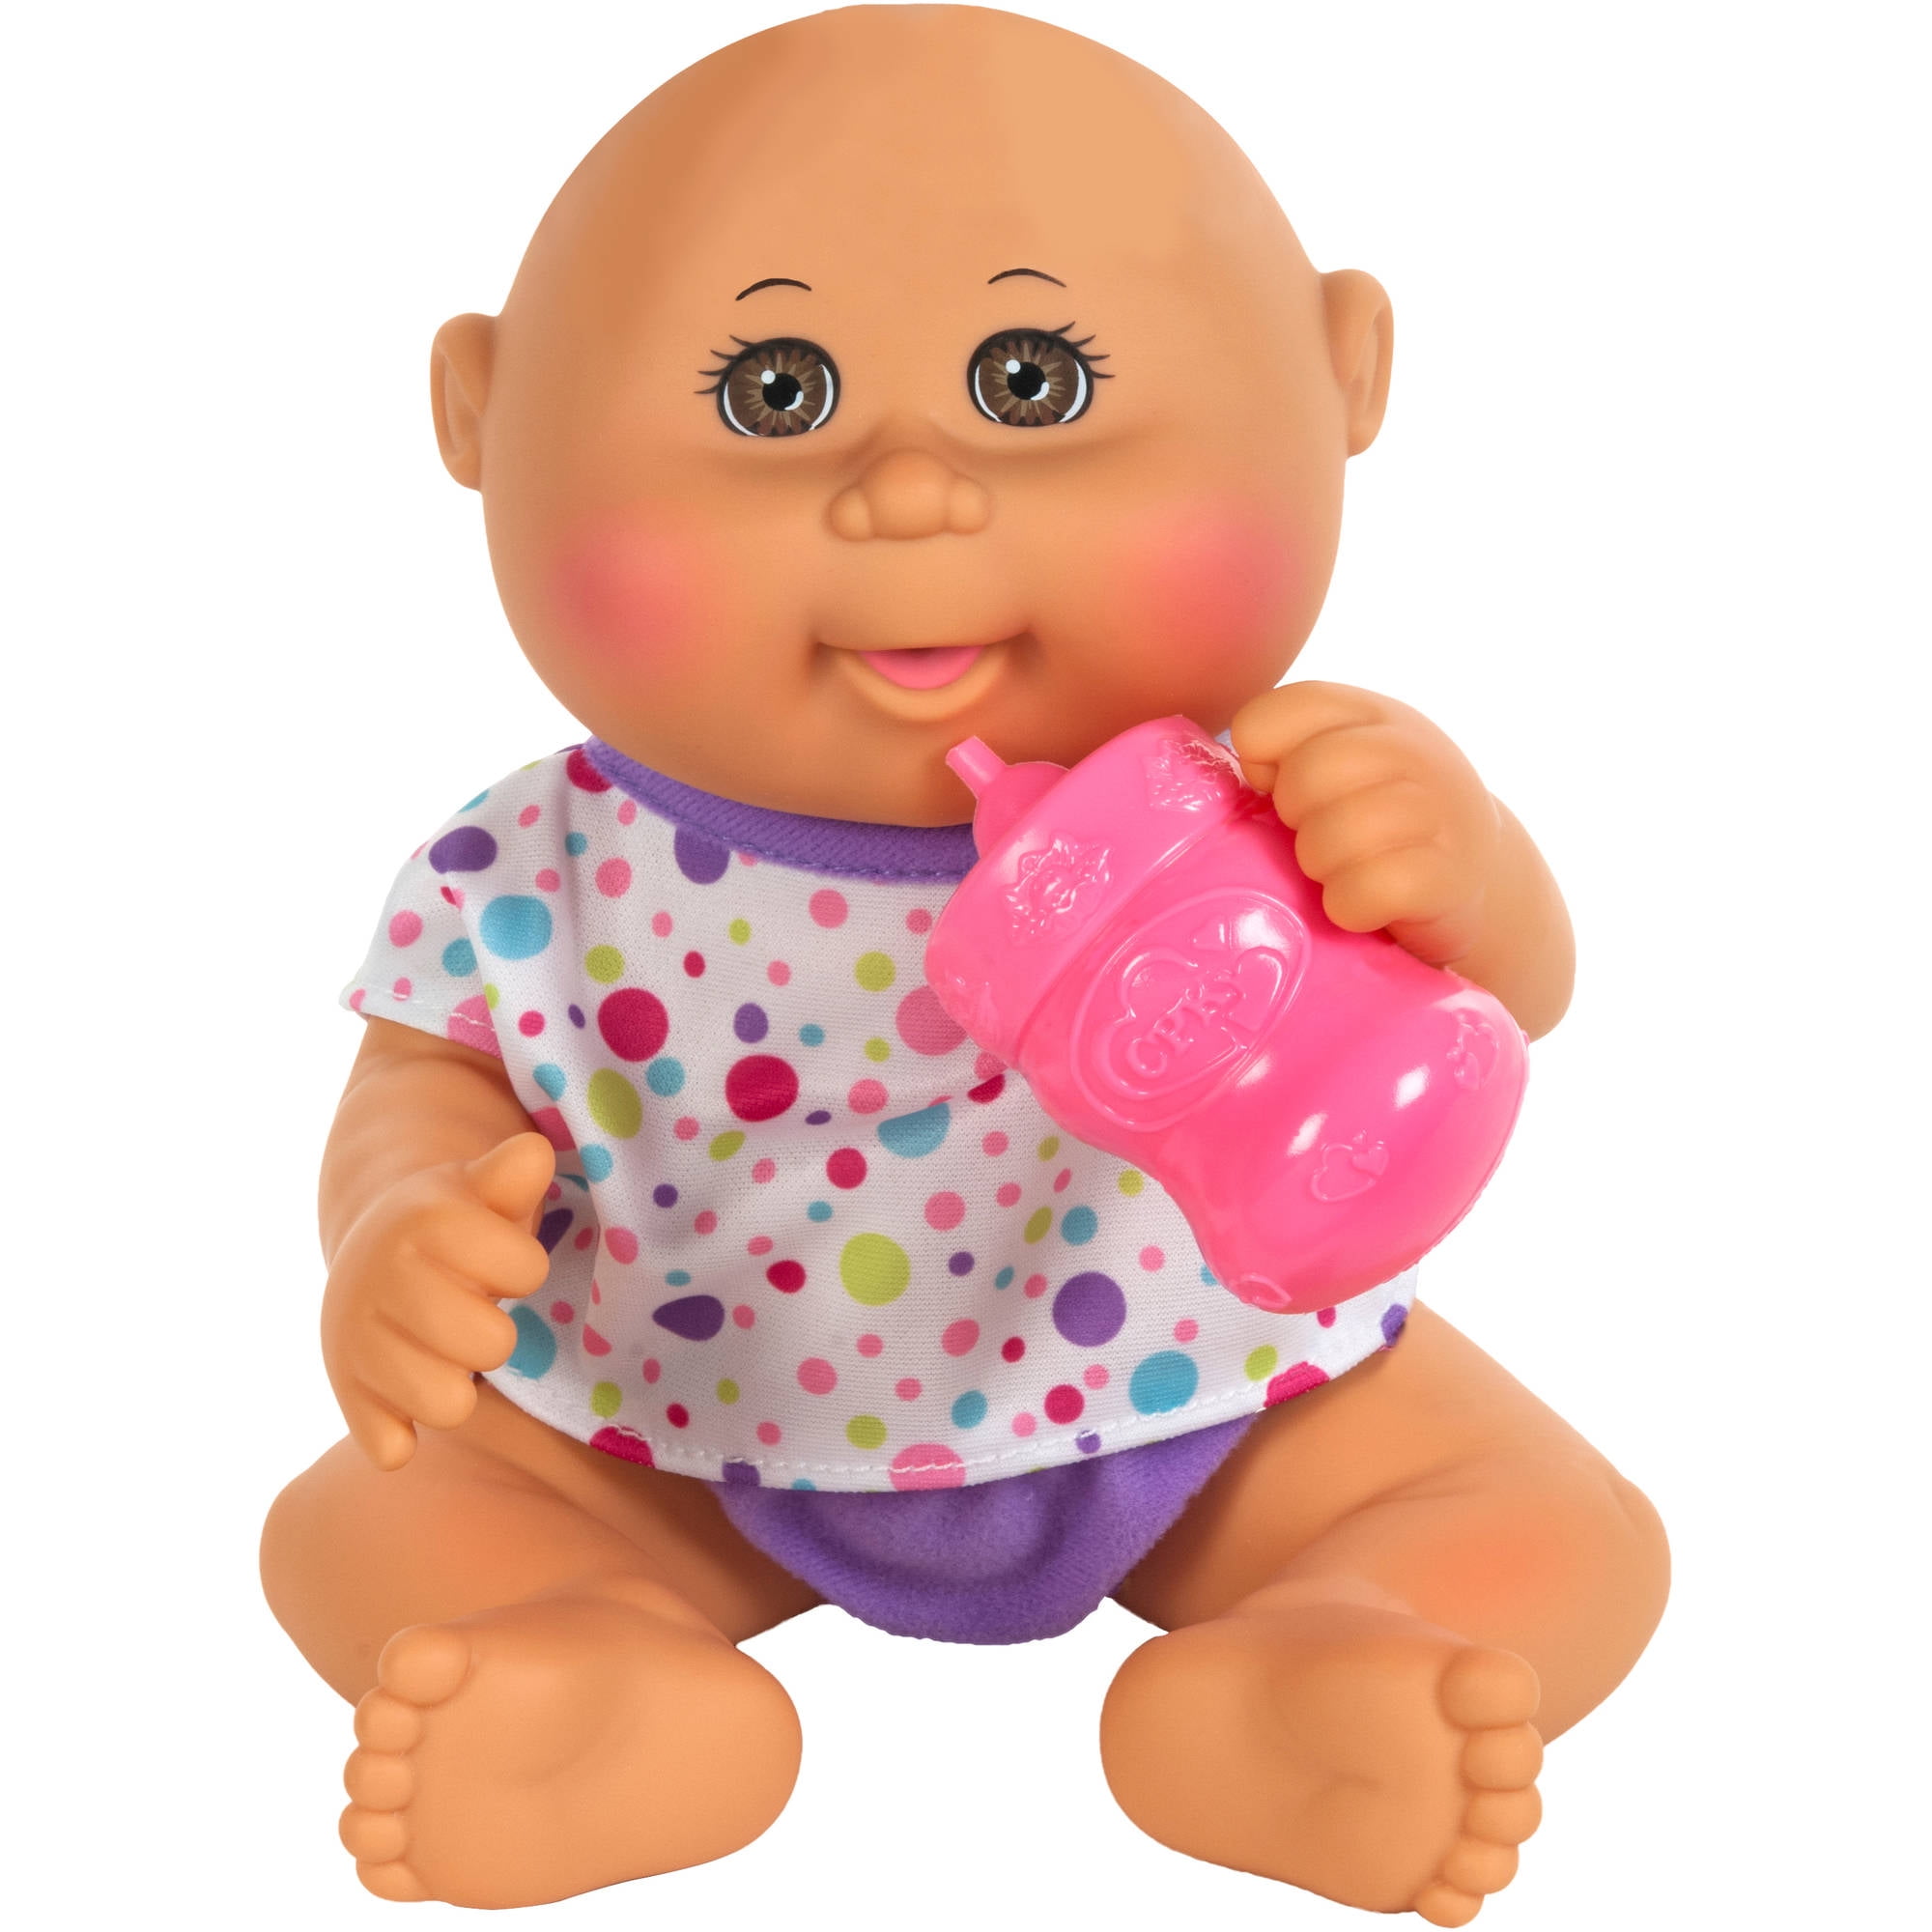 Cabbage Patch Kids Tiny Newborn Check up Time Biance Haydee October 29th for sale online 